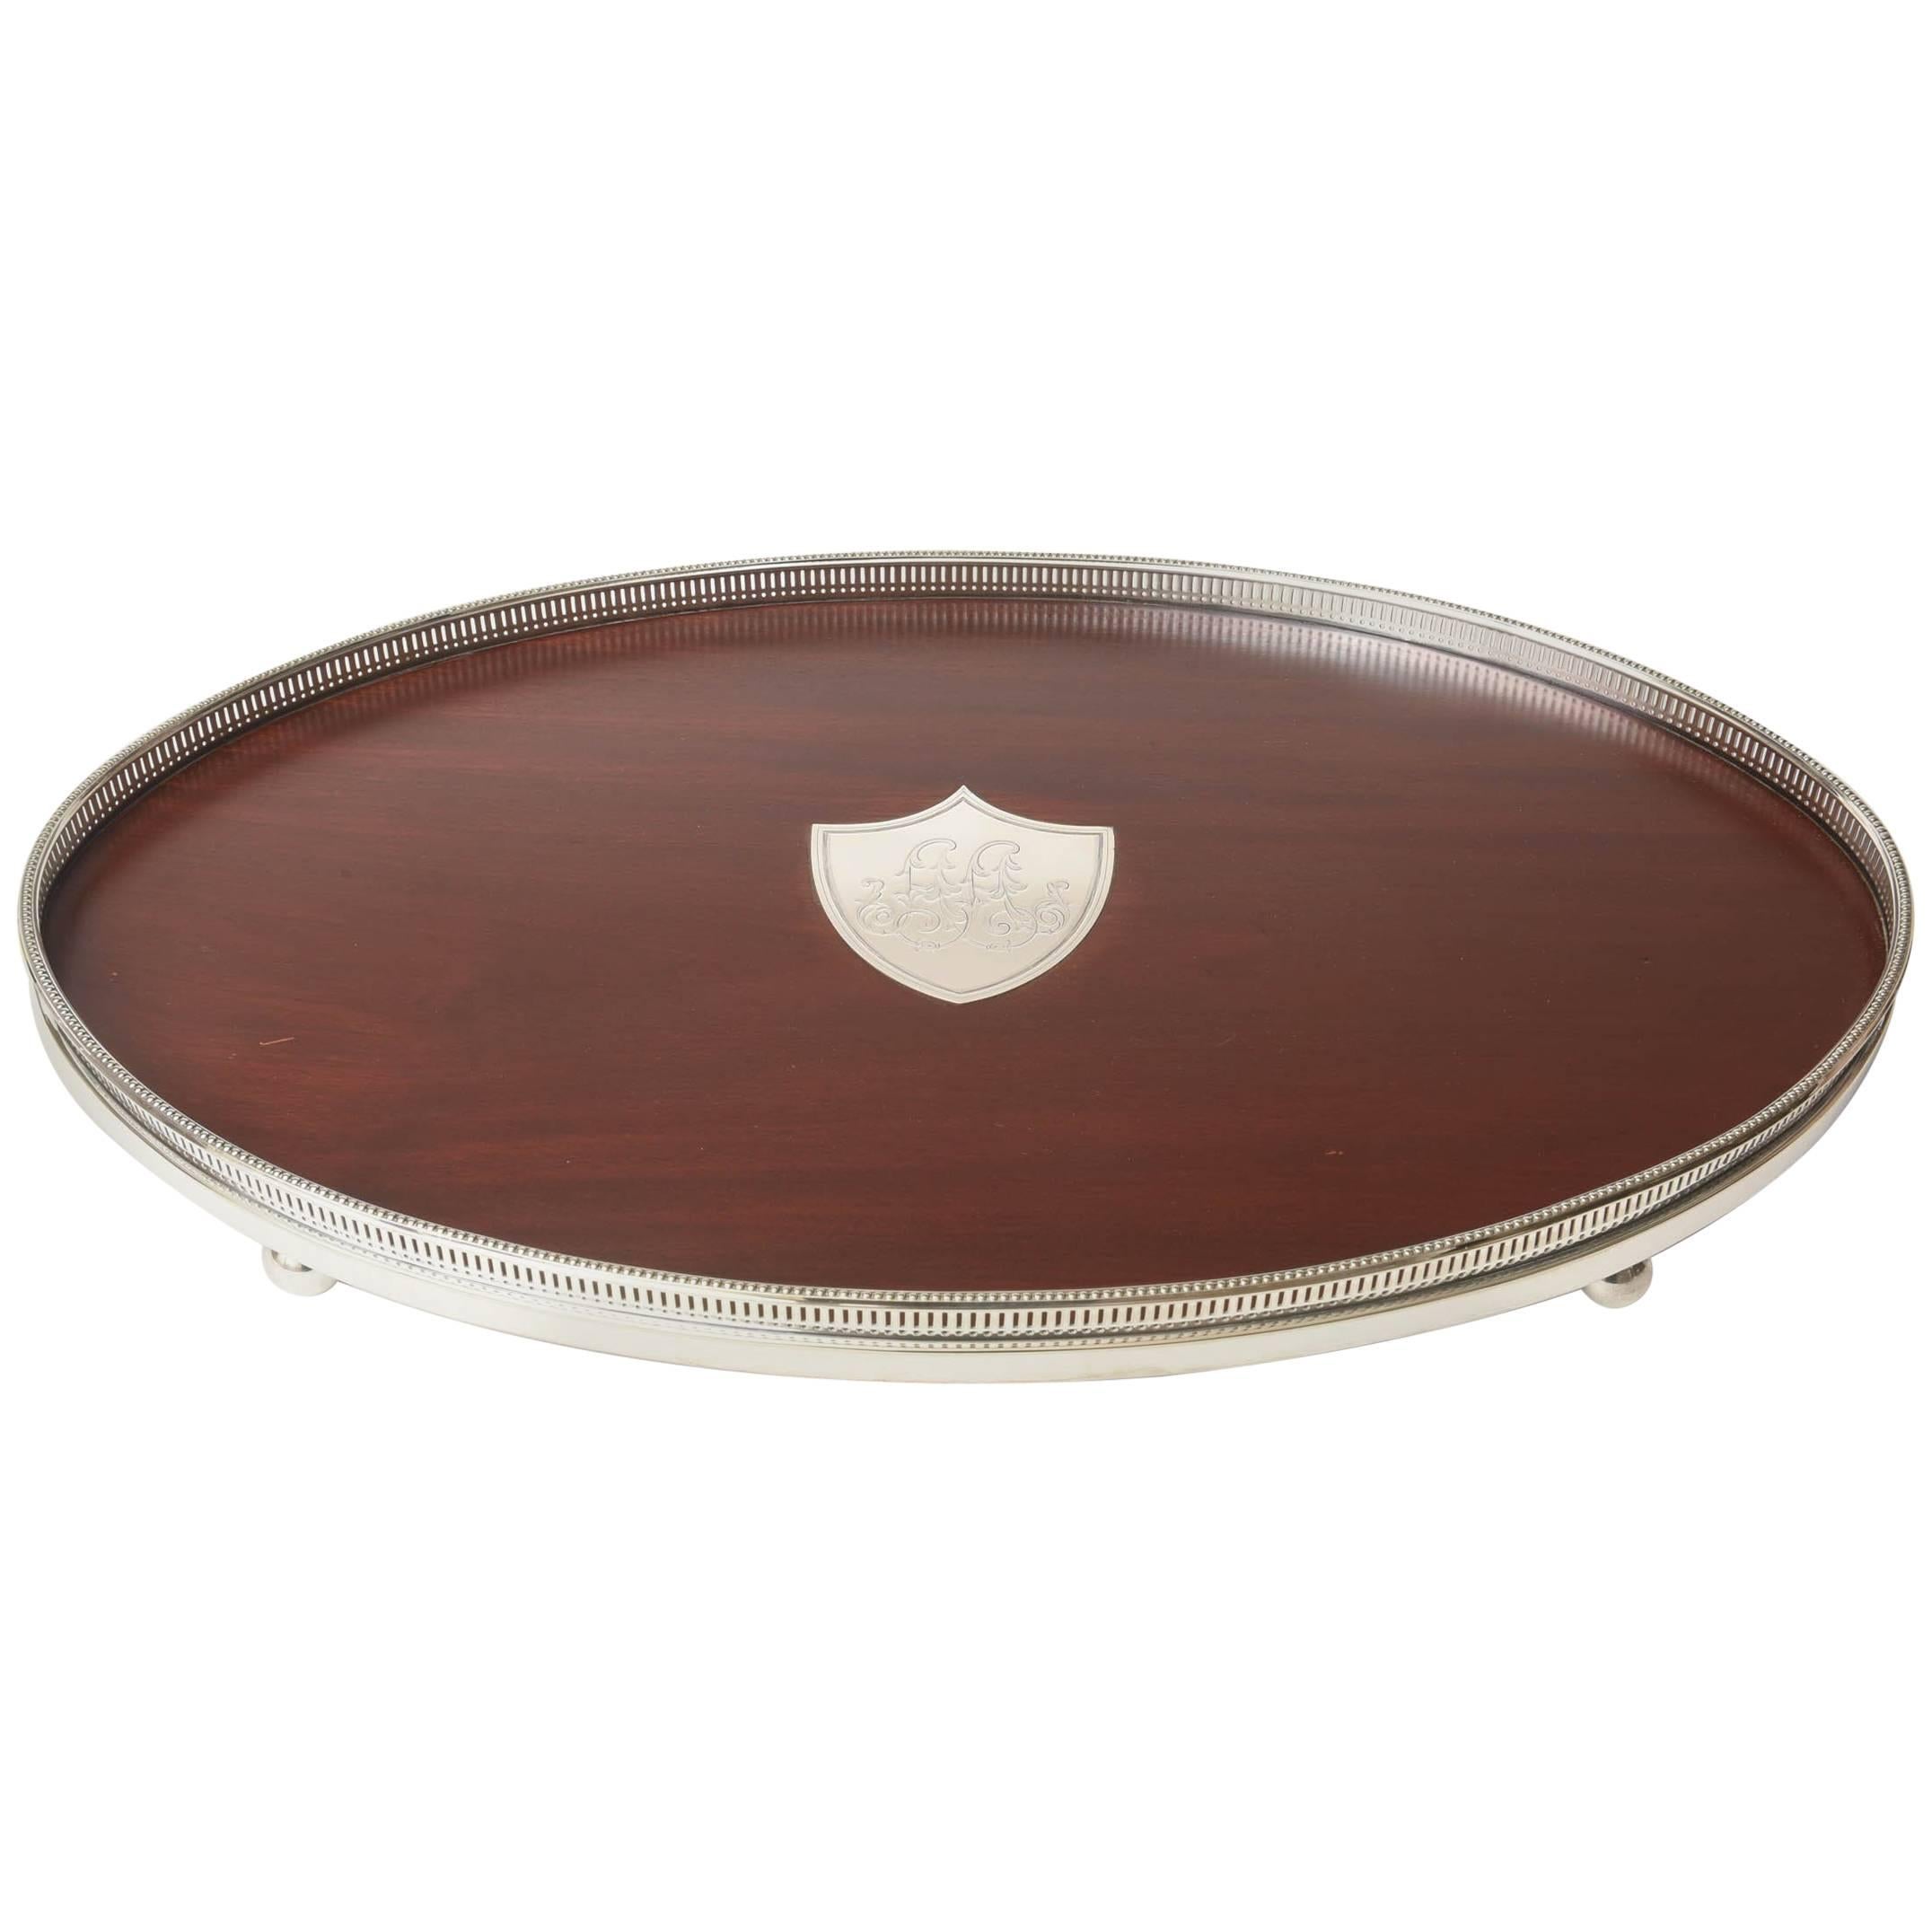 Tiffany Serving Tray, Pedestal Feet with Sterling Inset Medallion